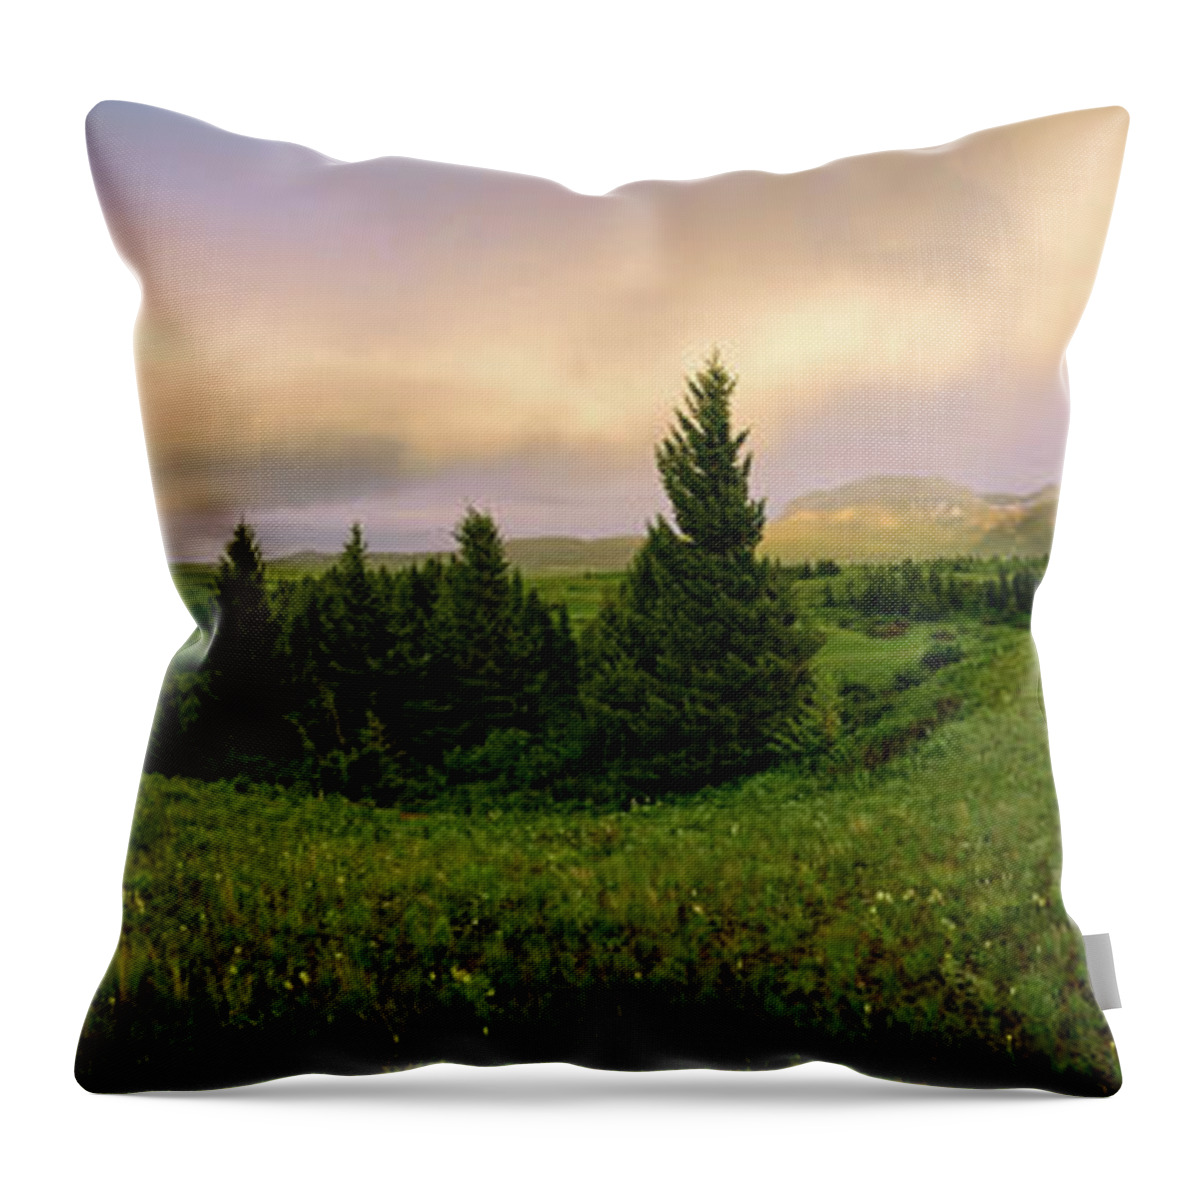 Warm The Soul Throw Pillow featuring the photograph Warm the Soul Panorama by Chad Dutson